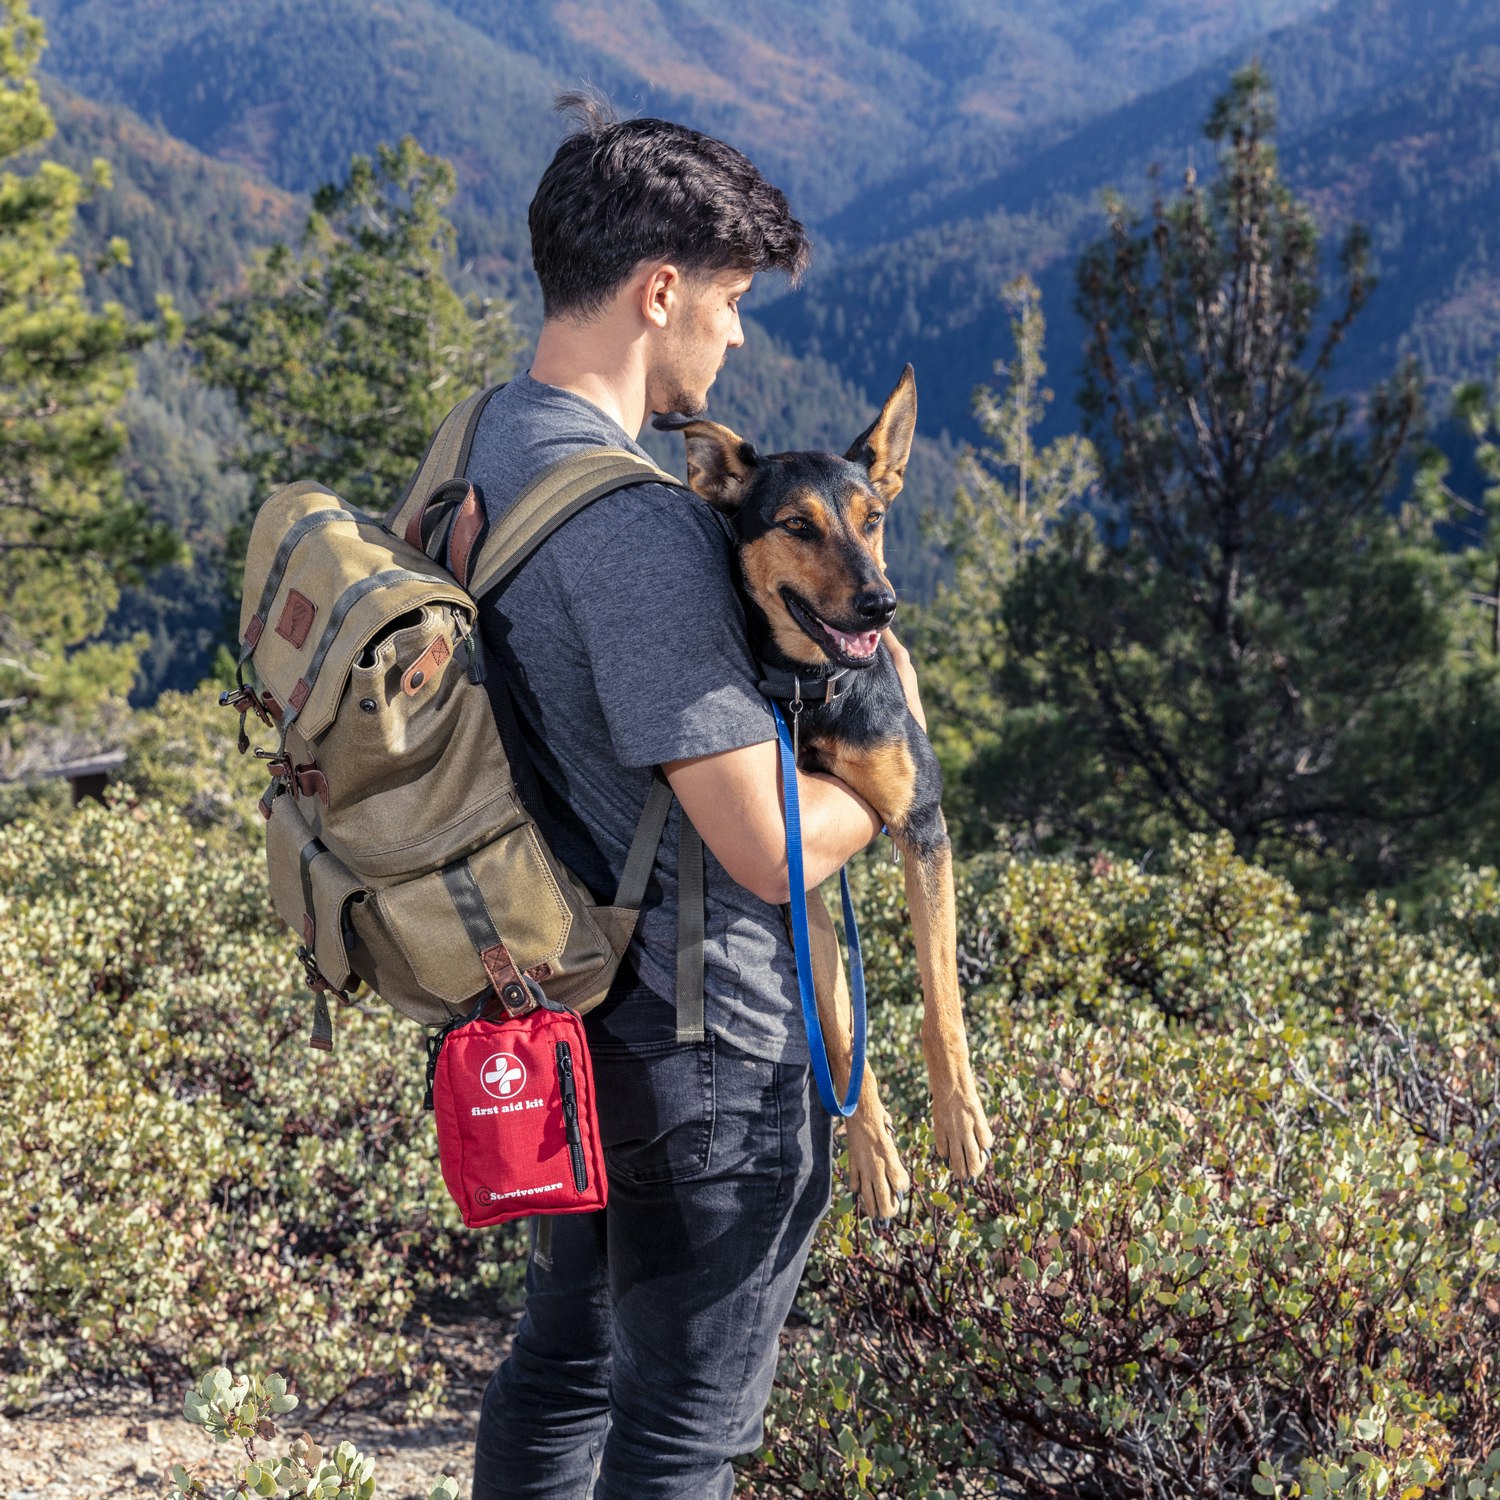 A man is on a mountain hike, surrounded by scrub bushes; he is carrying a dog and wearing a backpack with a red first aid kit clipped onto it.